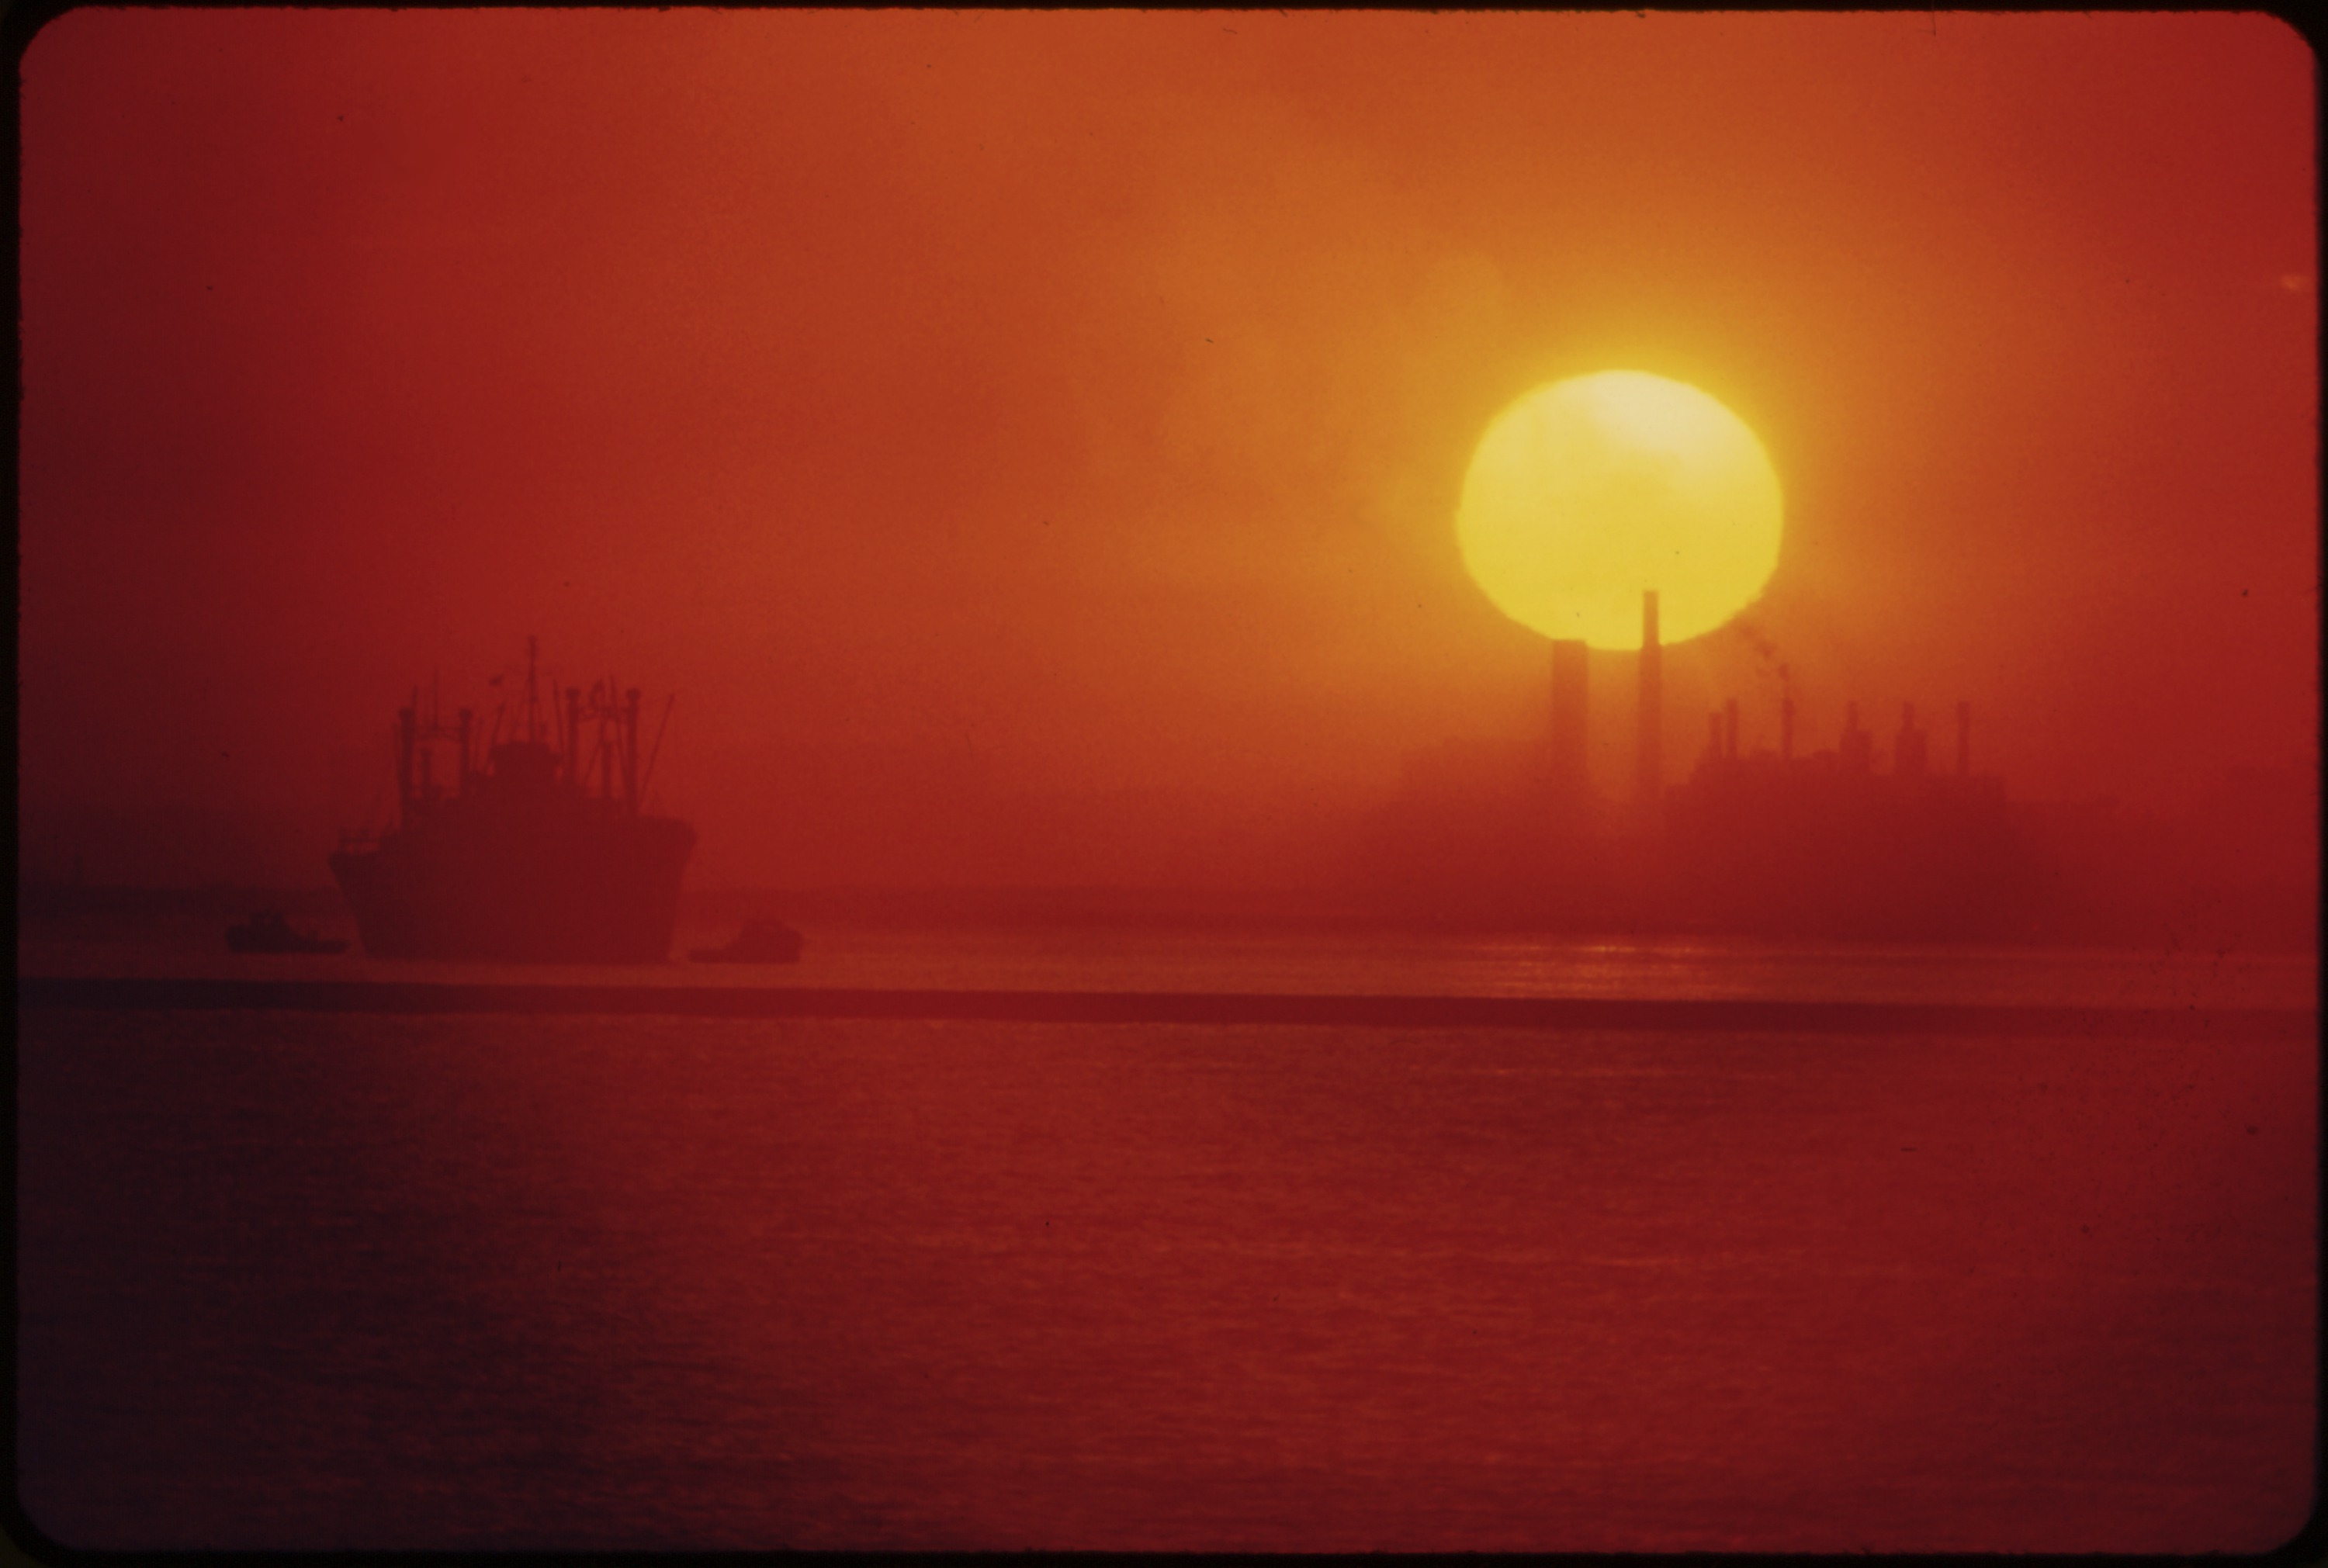 THE SUN RISES OVER CLEVELAND'S SMOG-OBSCURED SKYLINE - NARA - 550304